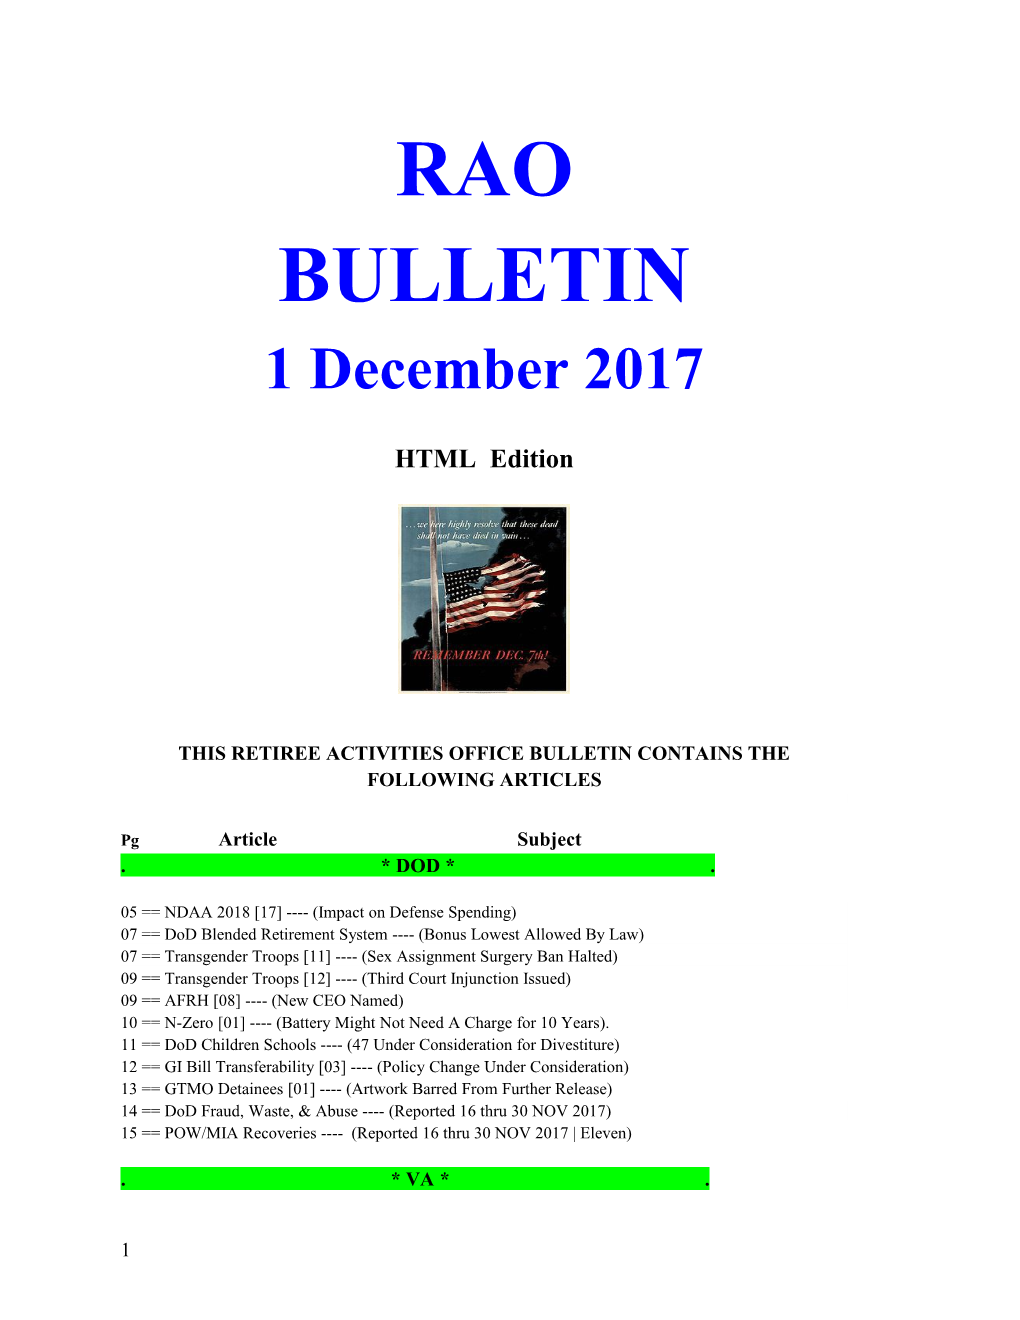 This Retiree Activities Office Bulletin Contains the Following Articles s1